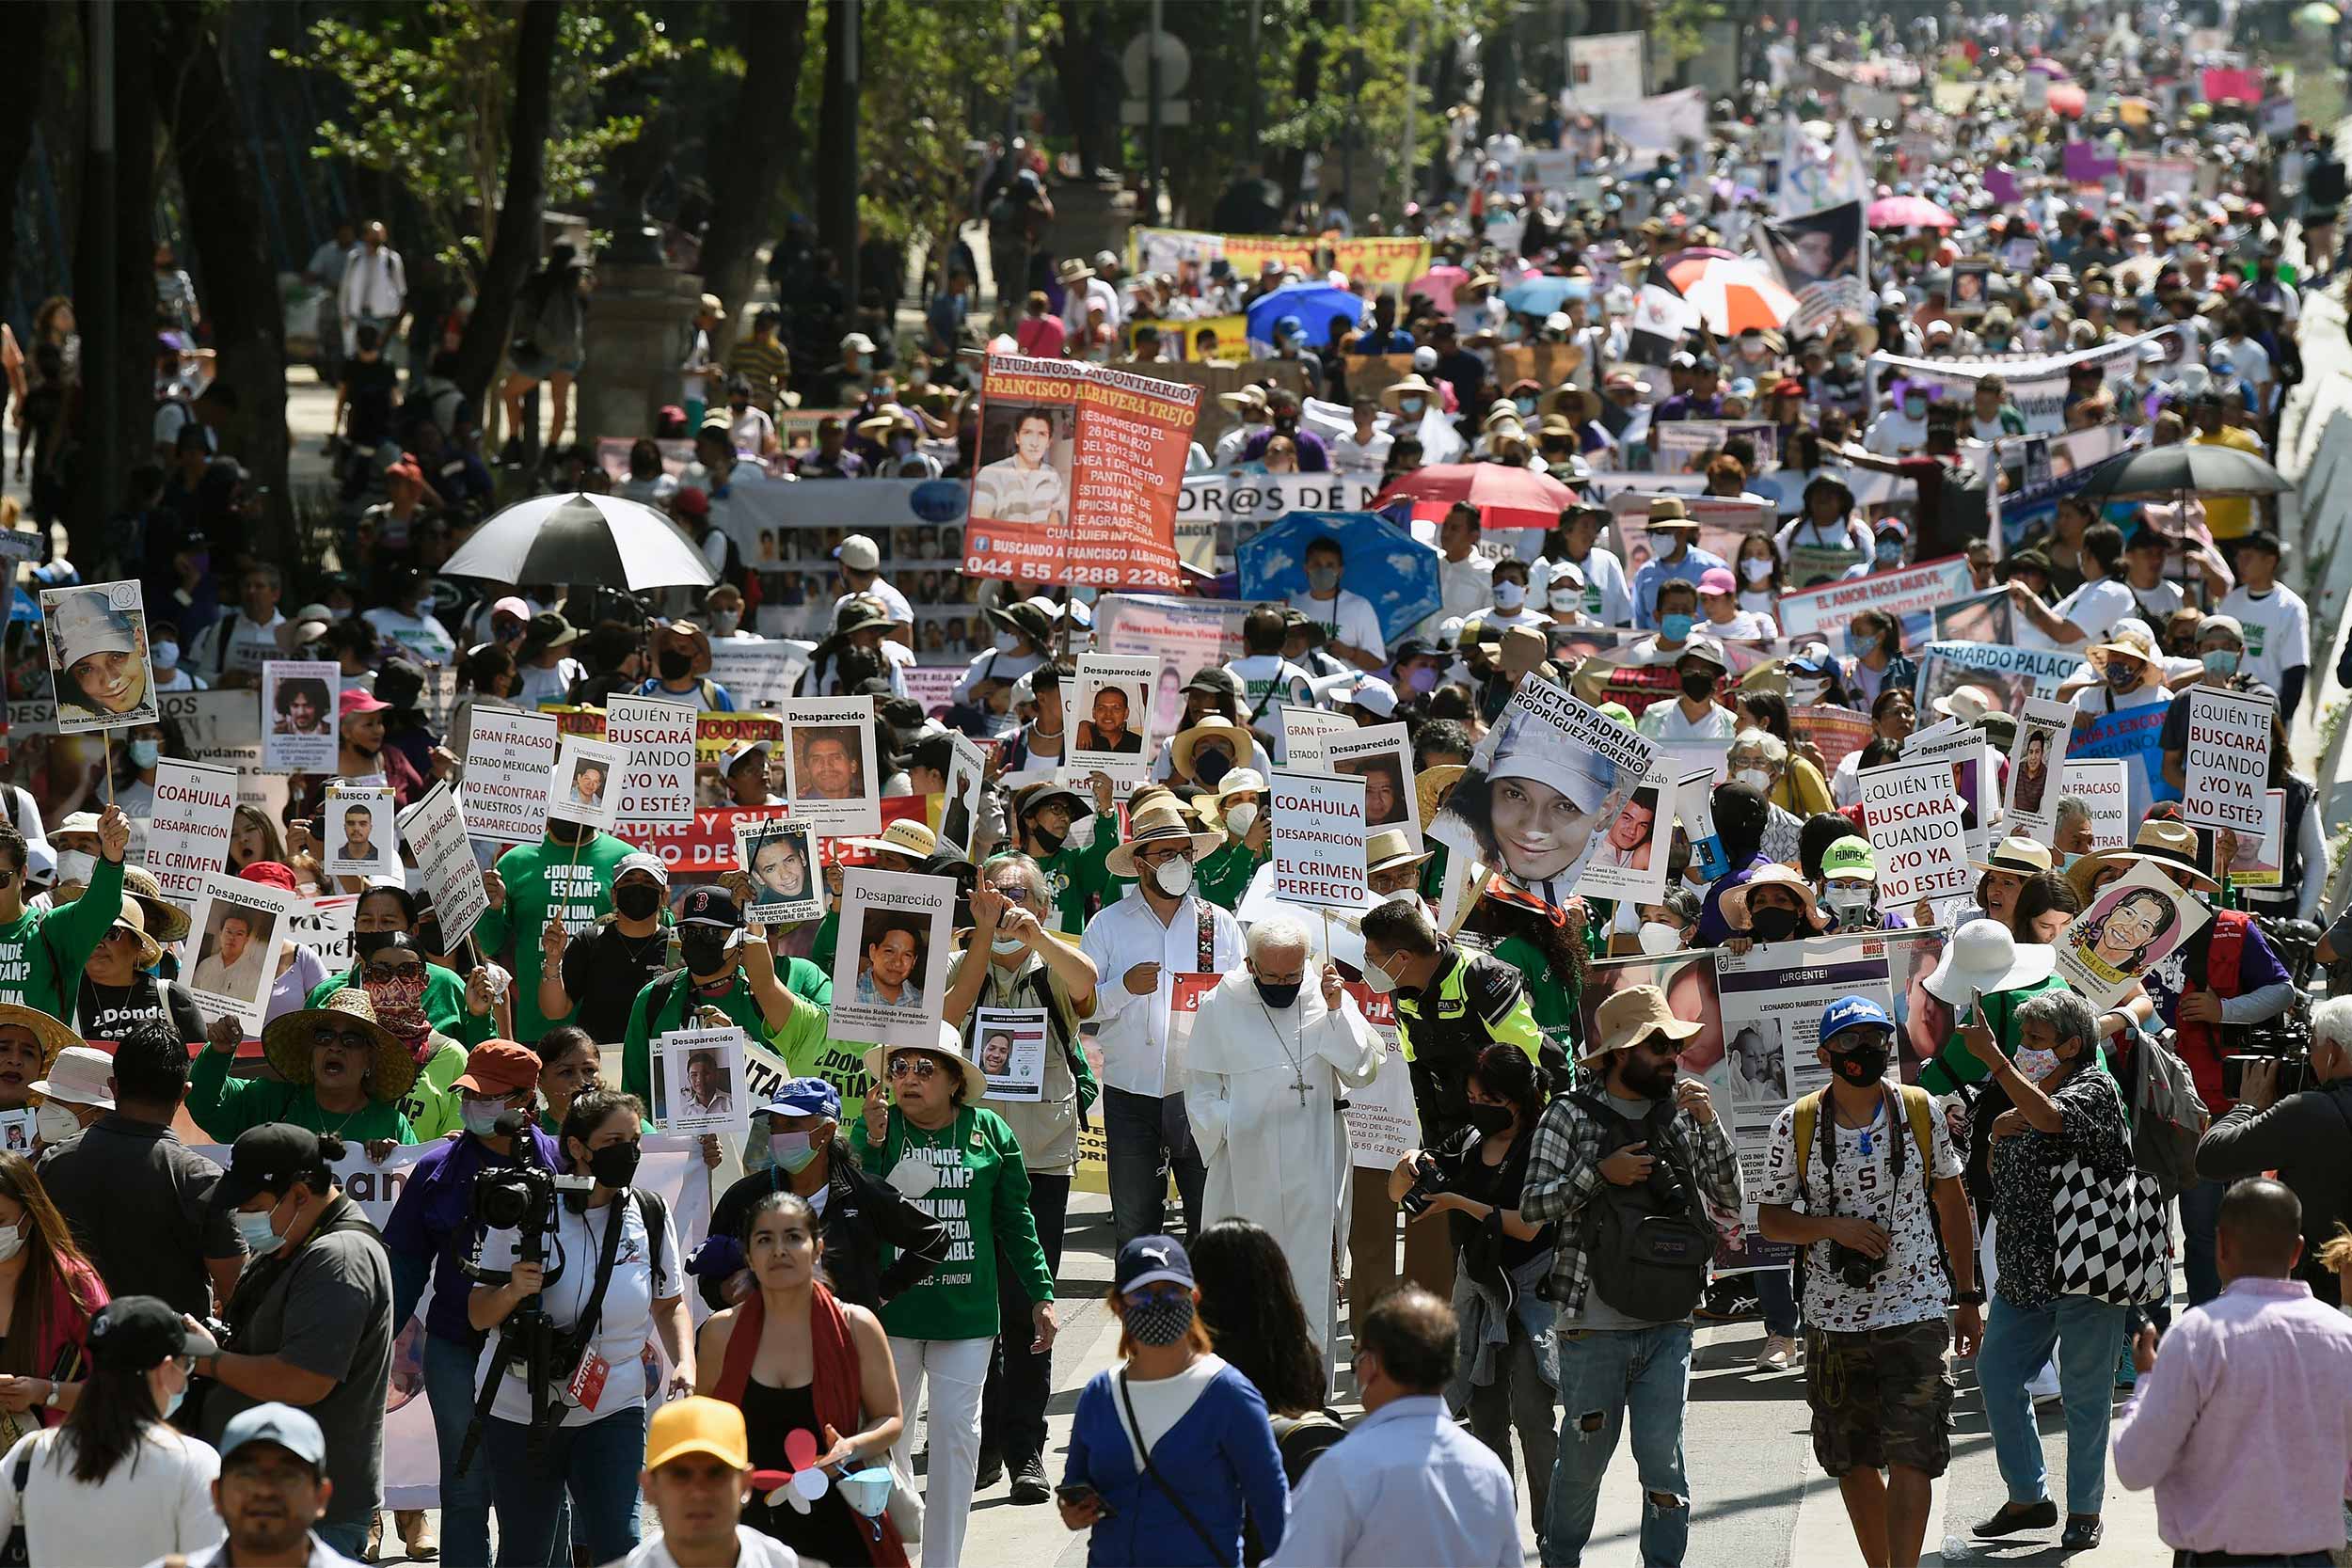 Mothers who's children have been disappeared and members of civil societies take part in a protest march along Reforma Avenue in Mexico City on May 10 2022, during Mother´s Day. © Alfredo Estrella/AFP via Getty Images